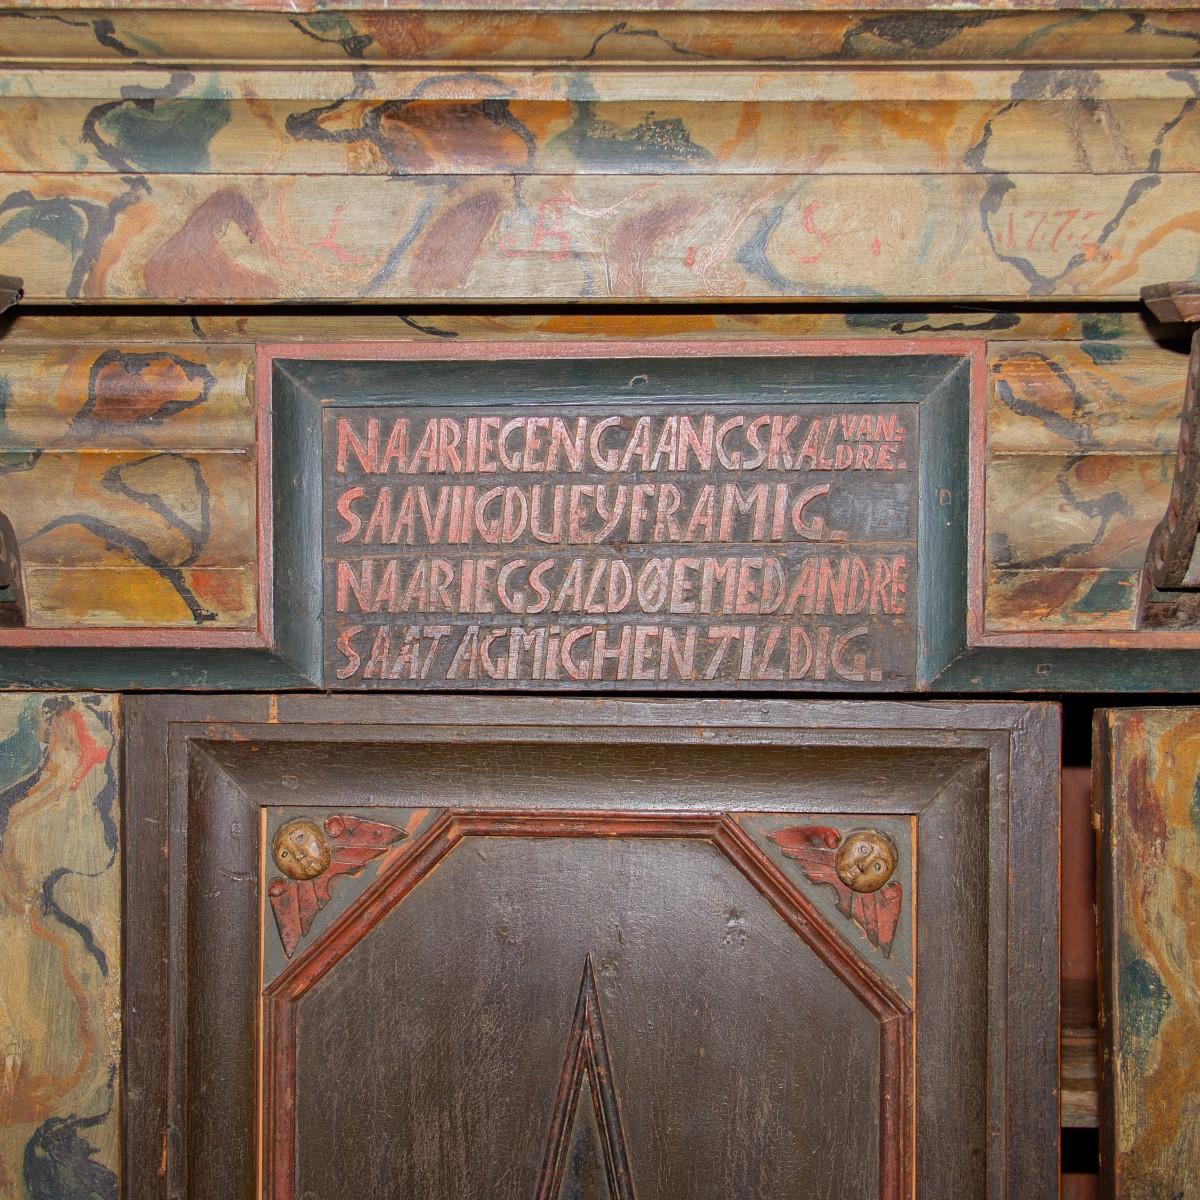 A large Danish painted court cabinet with two doors revealing shelving. Underneath the doors are two drawers. The top of the cabinet is adorned with a story in a Nordic language possibly regarding river deities. The cabinet has carved faces and